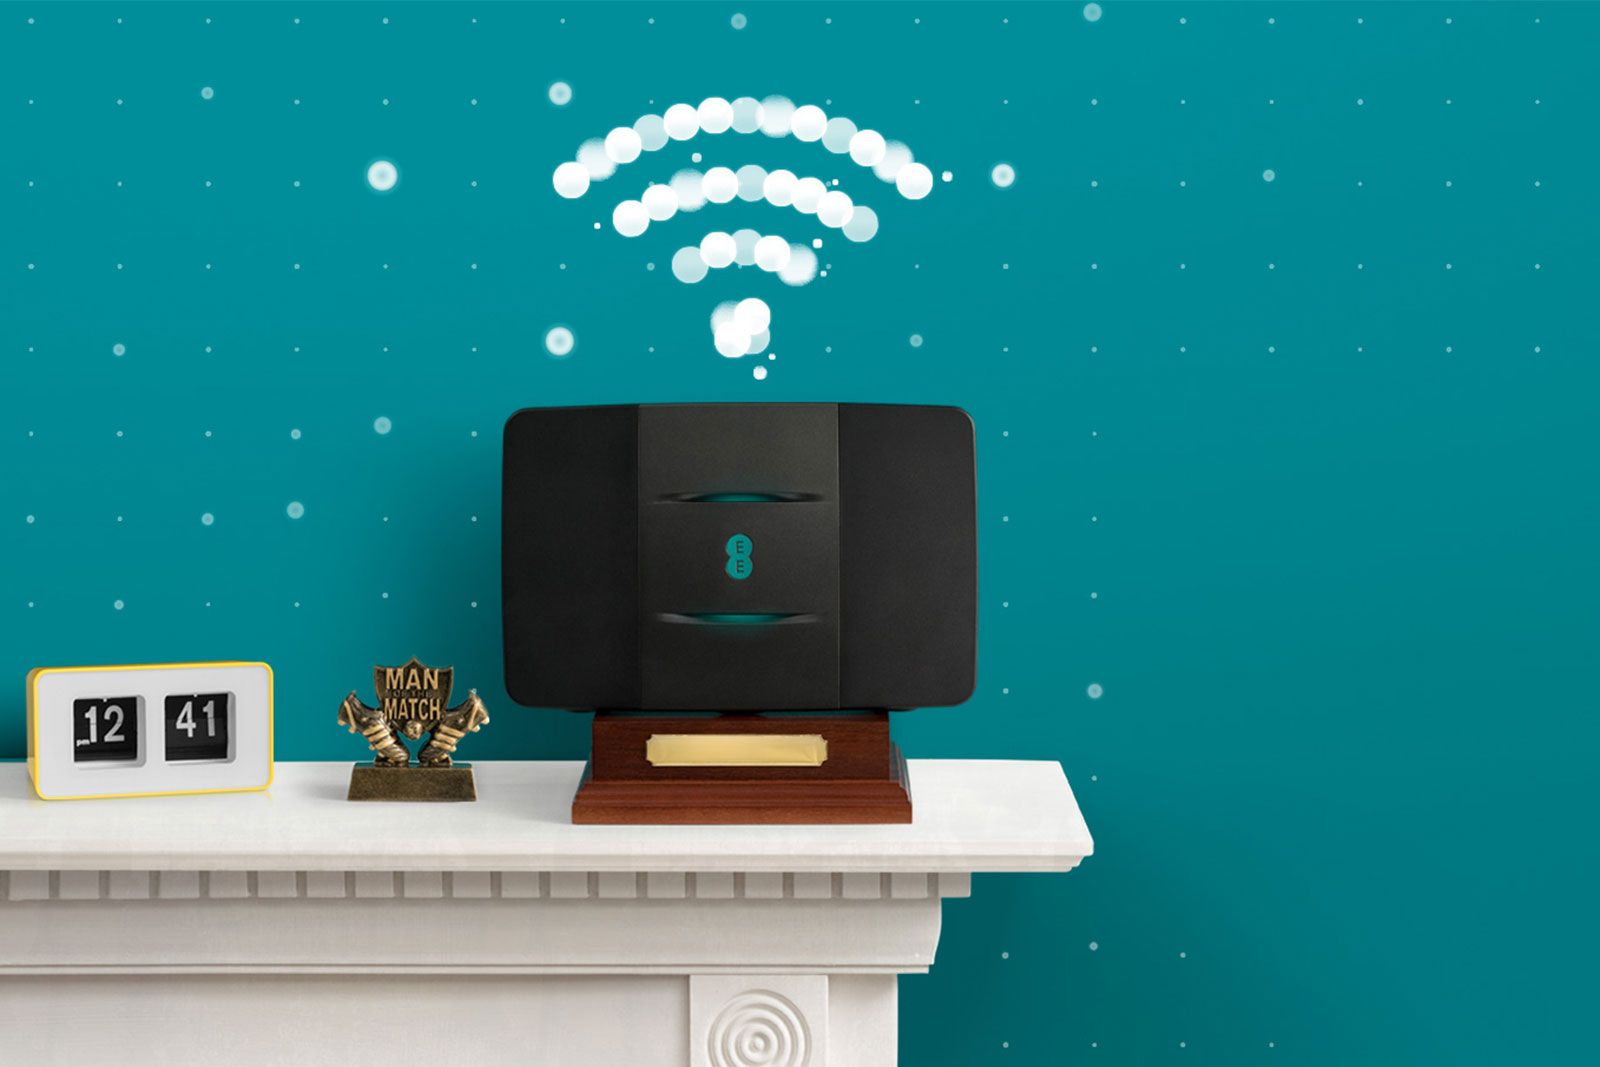 EE rolls out ultrafast 300Mbps Fibre Max home broadband image 1